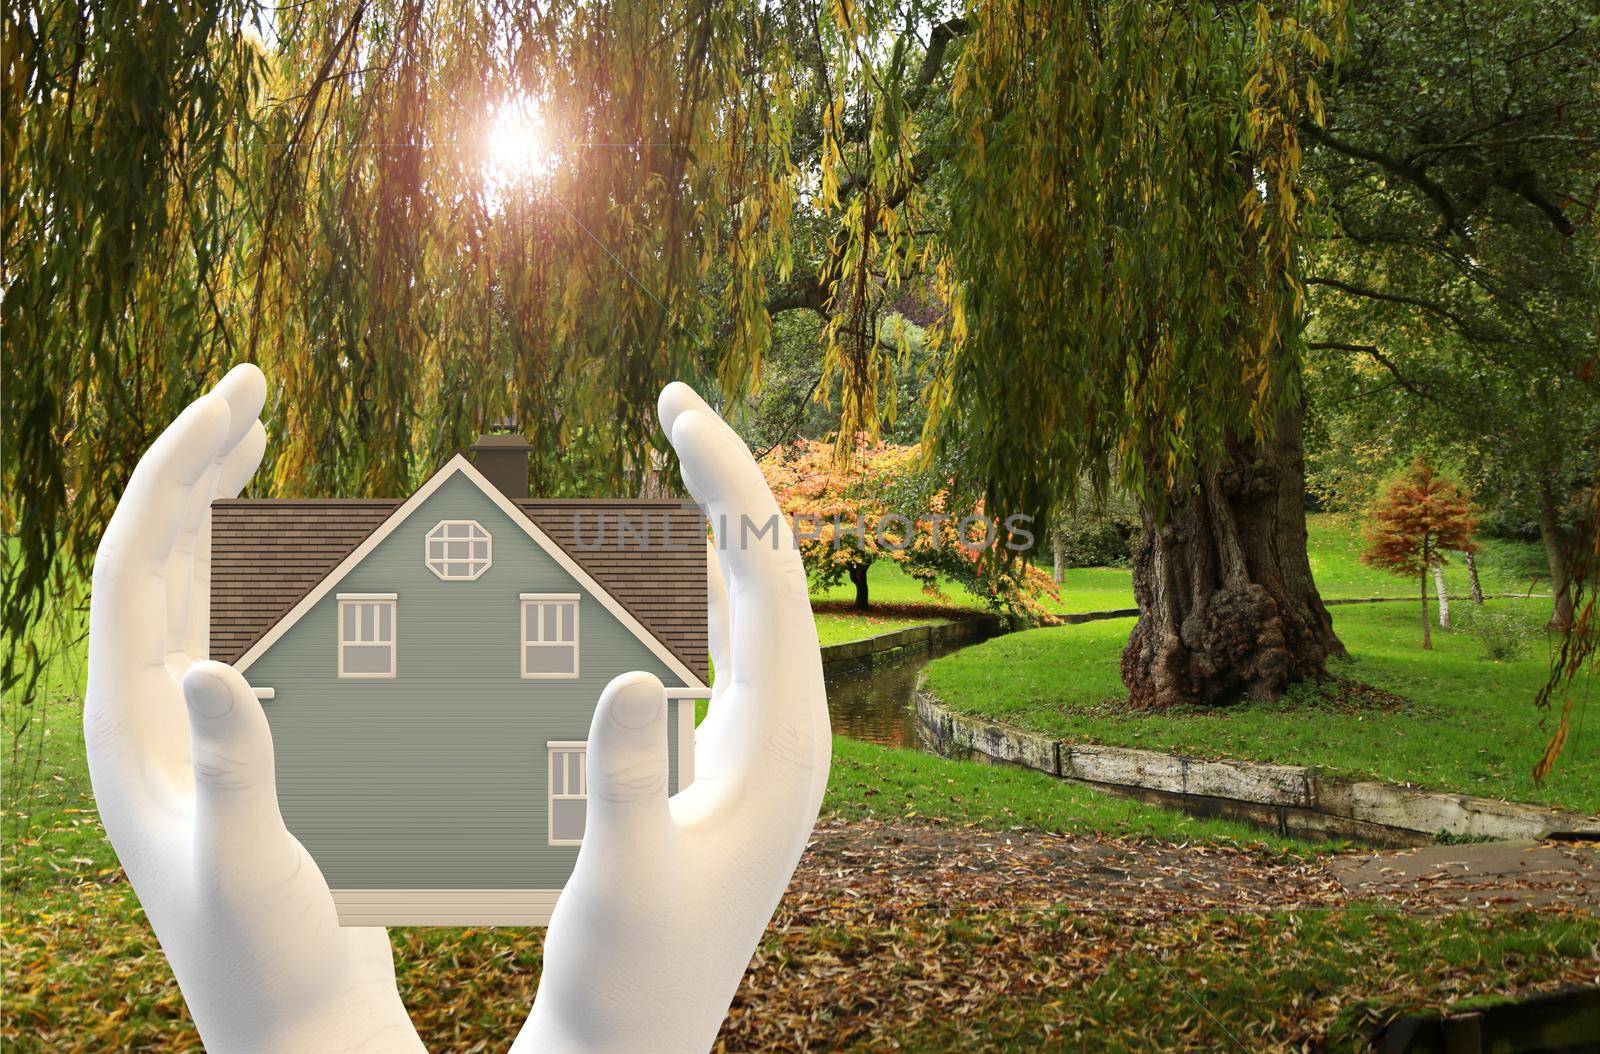 House in hands in sun lights rays on landscape background. Property protection, cost saiving concept. 3D illustration